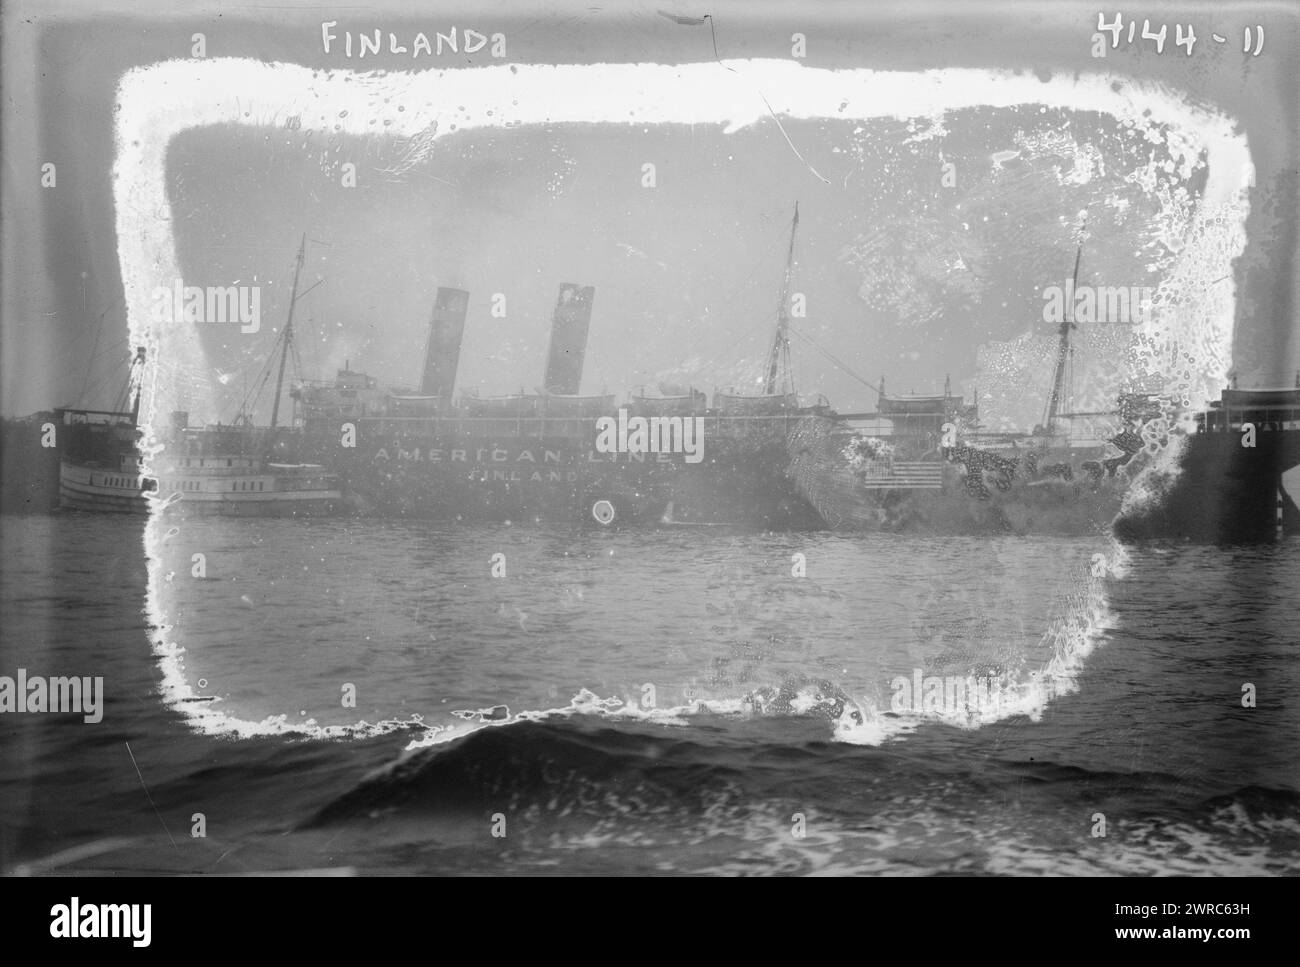 FINLAND, Photograph shows the SS Finland which became the USS Finland during World War I when she served as a United States Navy transport ship., between ca. 1915 and 1917, Glass negatives, 1 negative: glass Stock Photo